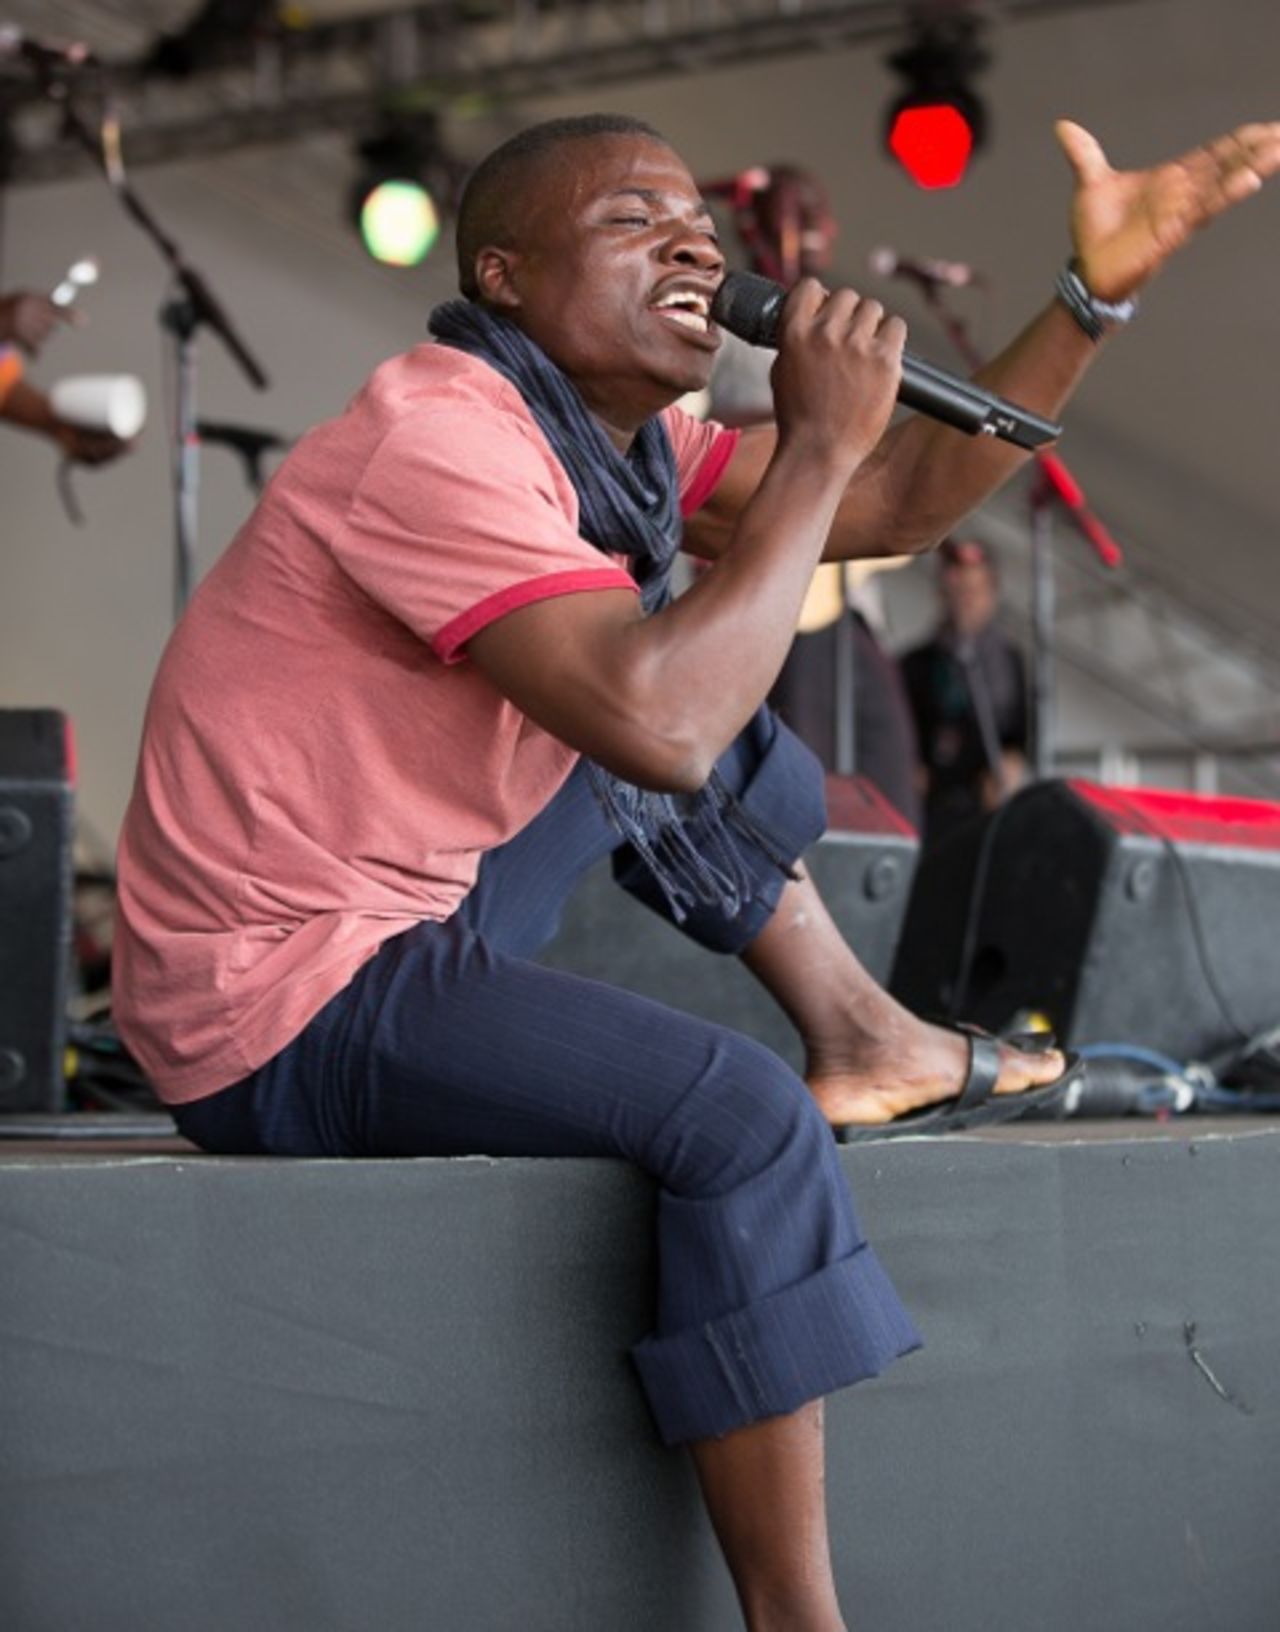 "It was remarkable to see," says Brennan of the Womad show. "Having never even been on a stage before, never sung with amplified microphones before, to going all the way to really putting on a show."